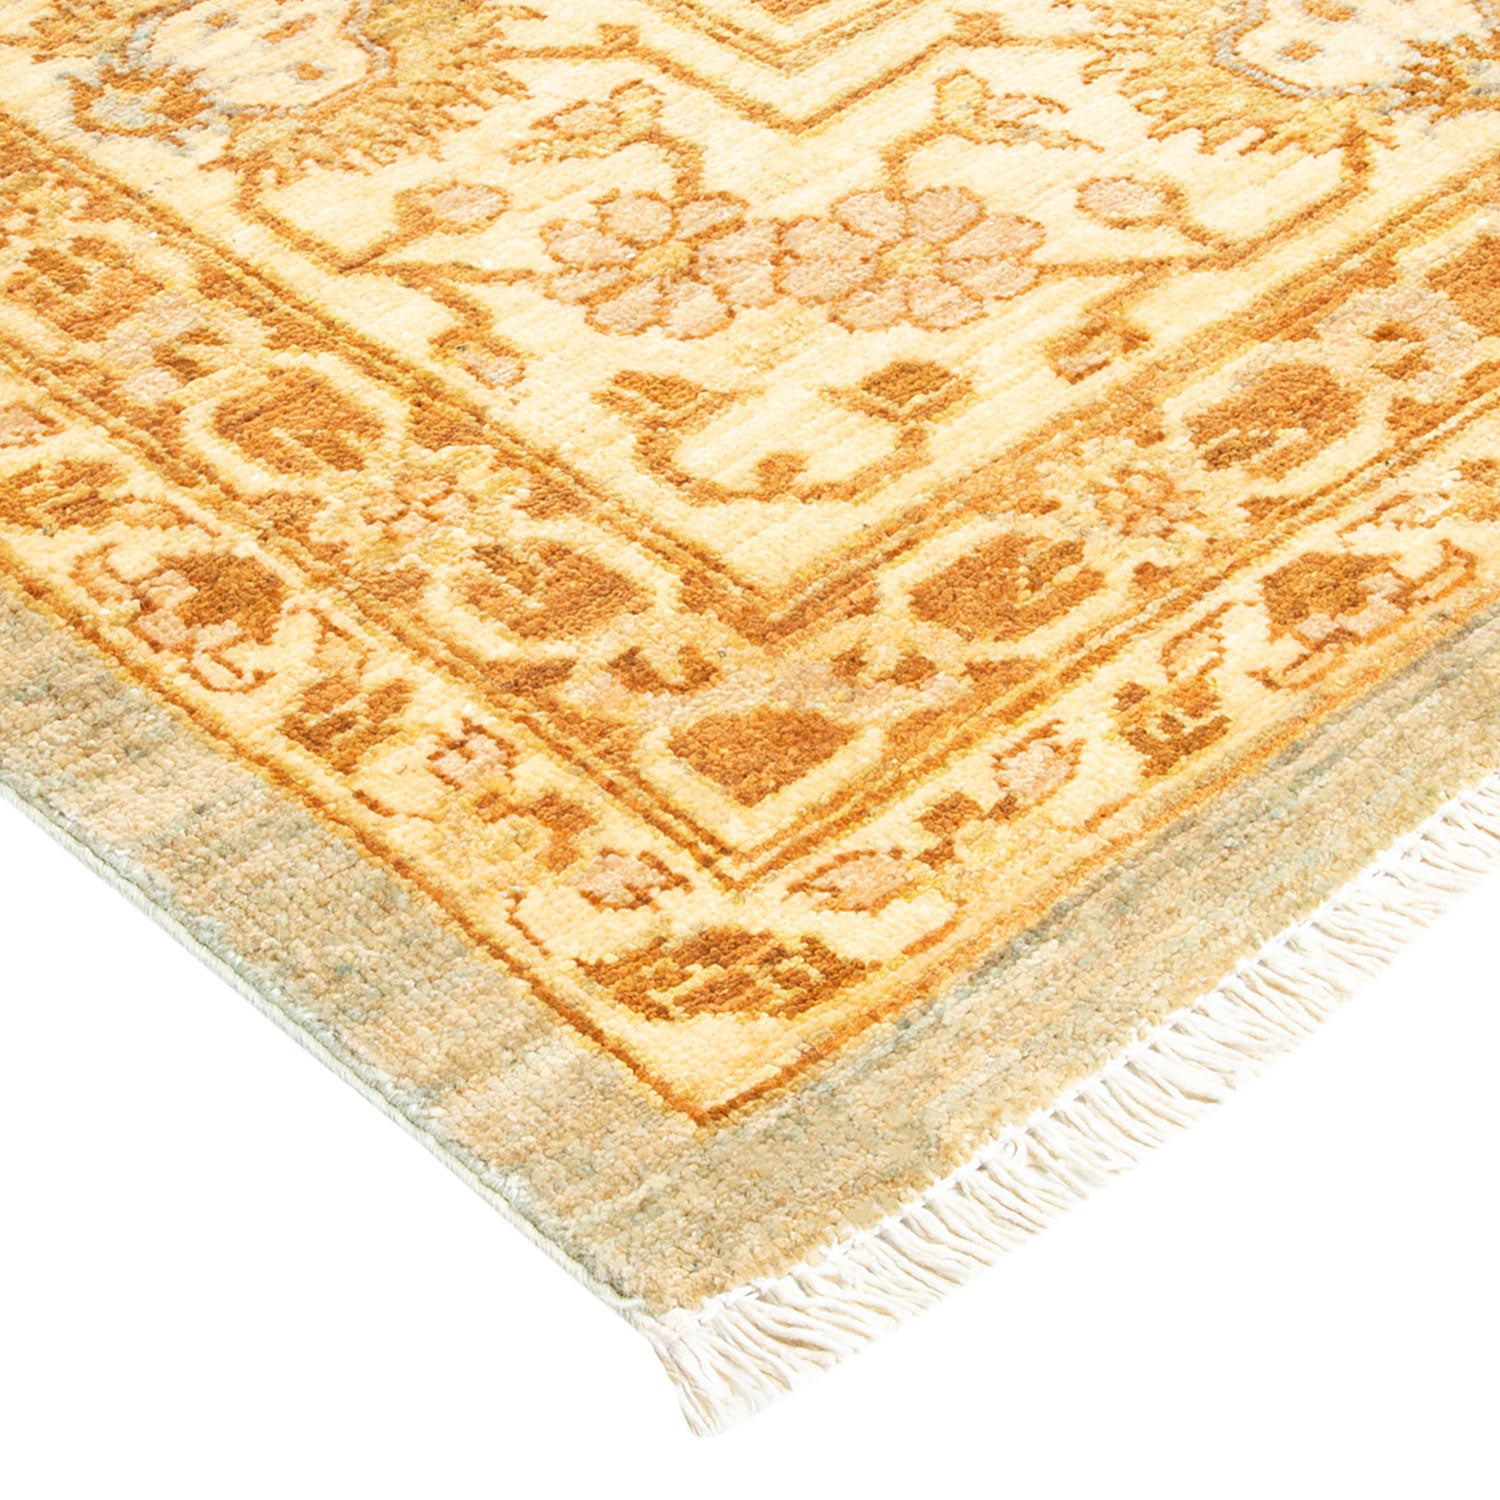 Decorative rug with intricate geometric and floral patterns in beige.